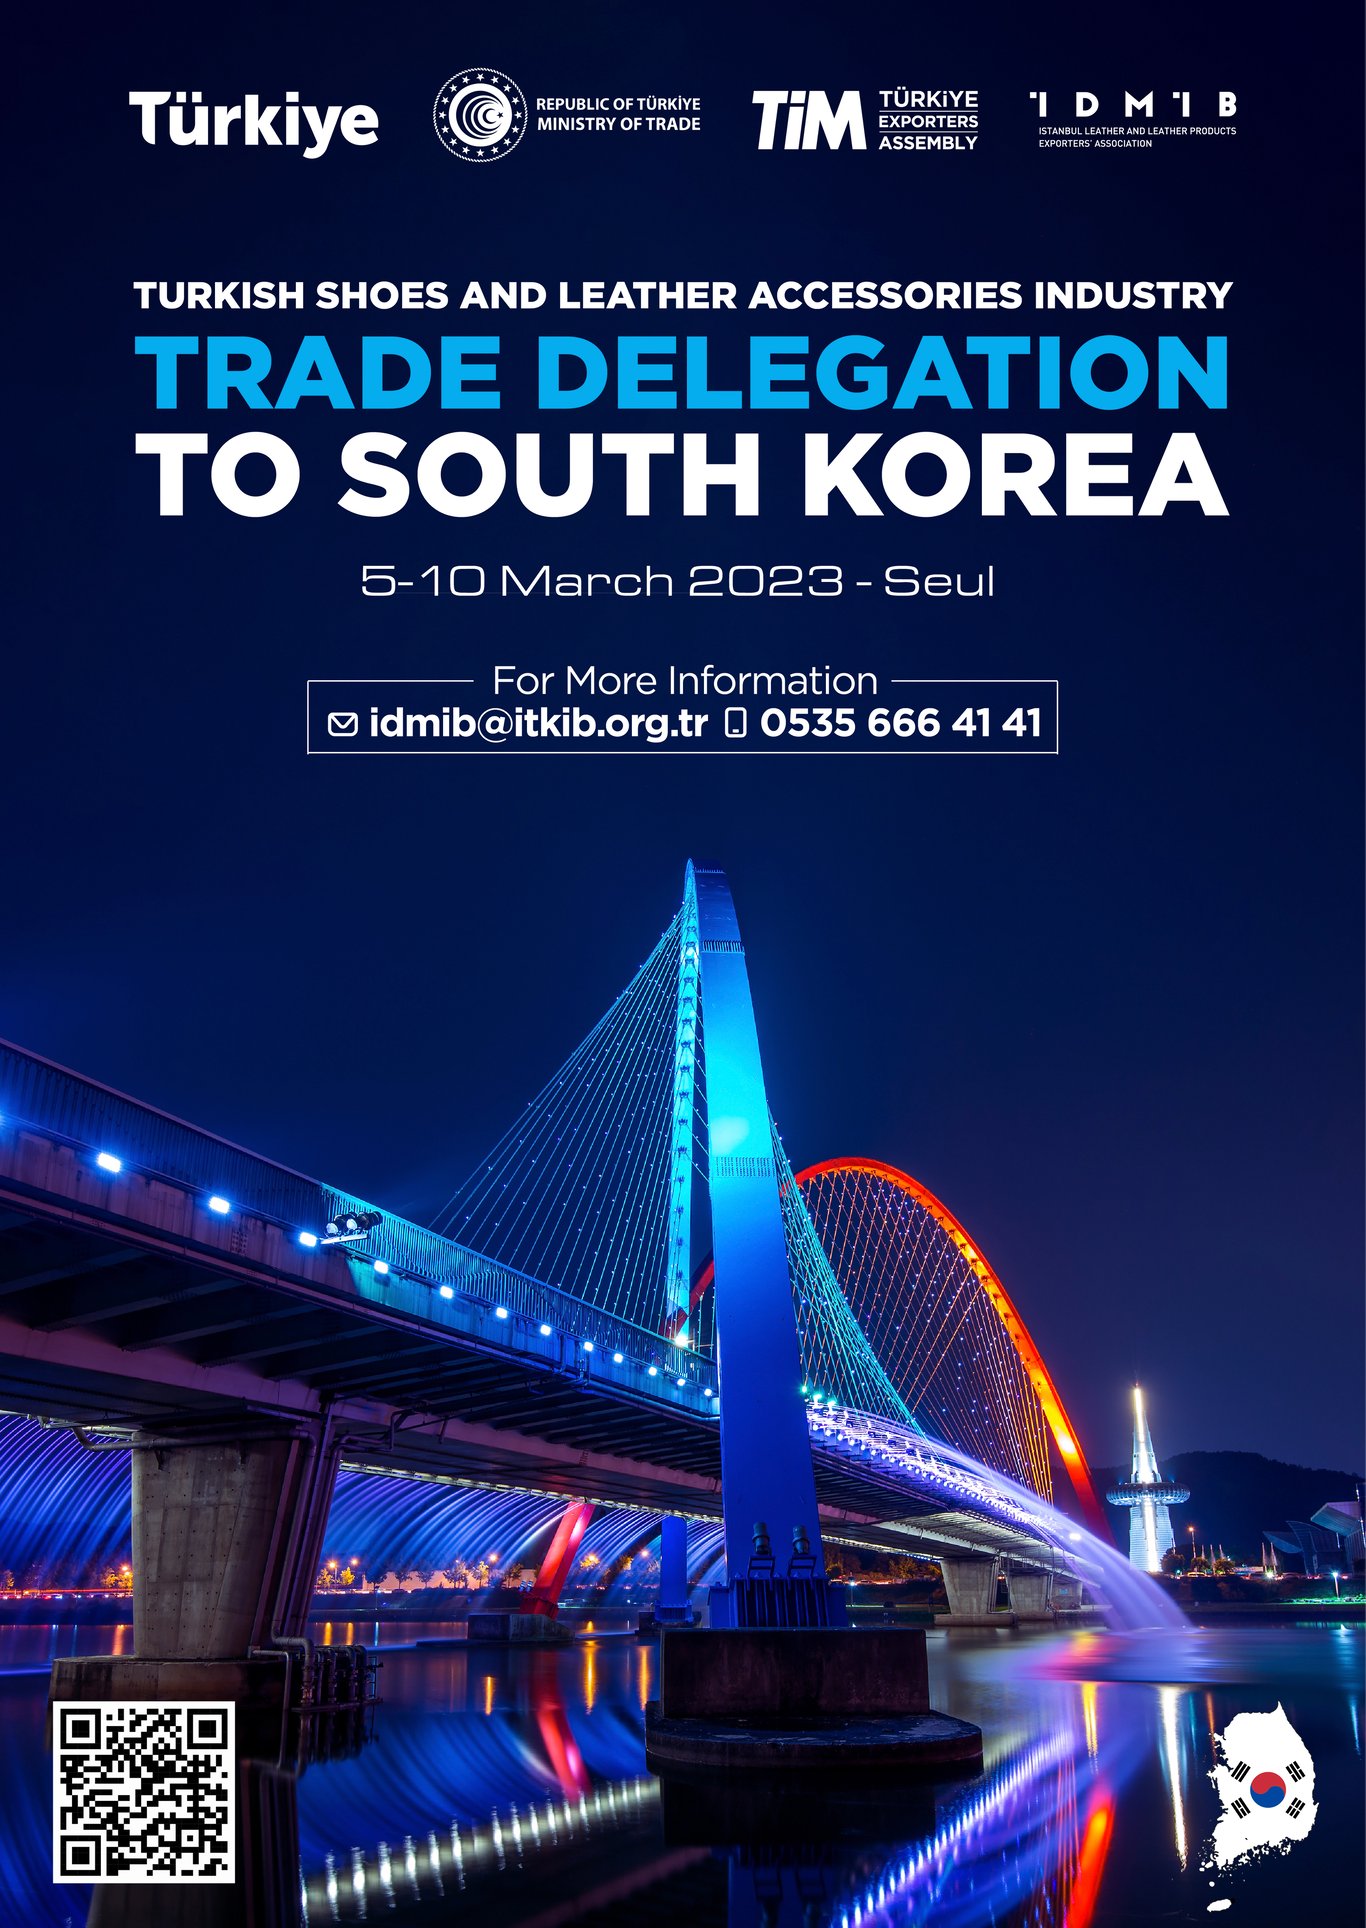 5-10 MARCH 2023 TURKISH SHOES AND LEATHER ACCESSORIES TRADE DELEGATION TO SOUTH KOREA